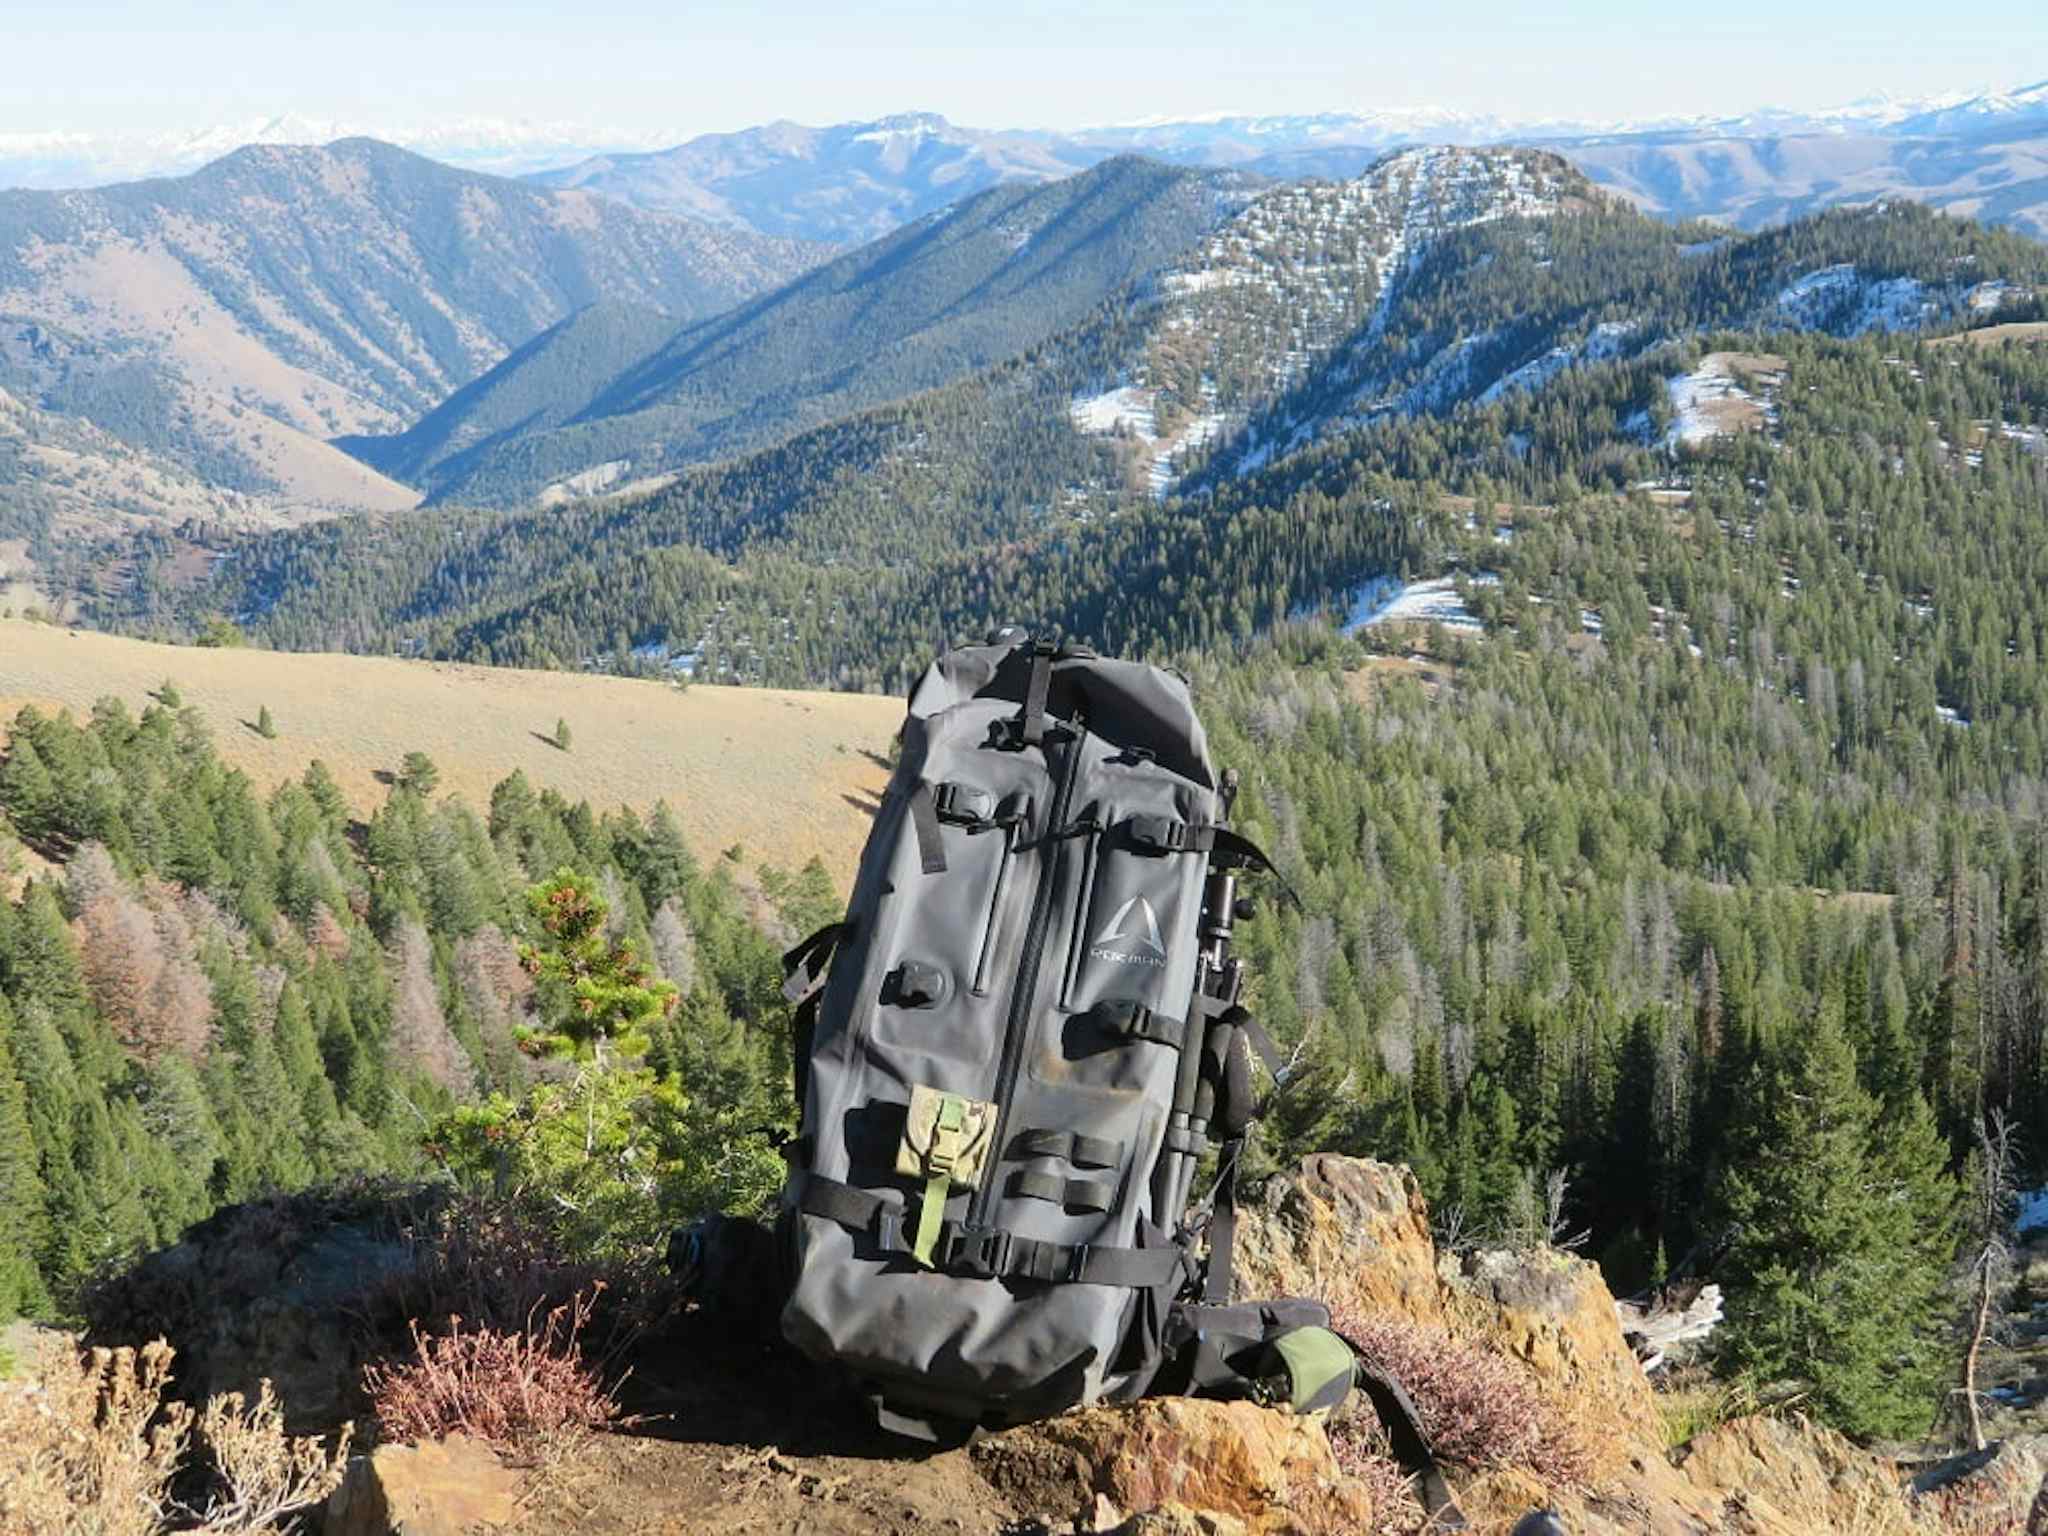 Backpacking gear offered at Rokman Gear in St. Anthony, Idaho of the Yellowstone Teton Territory